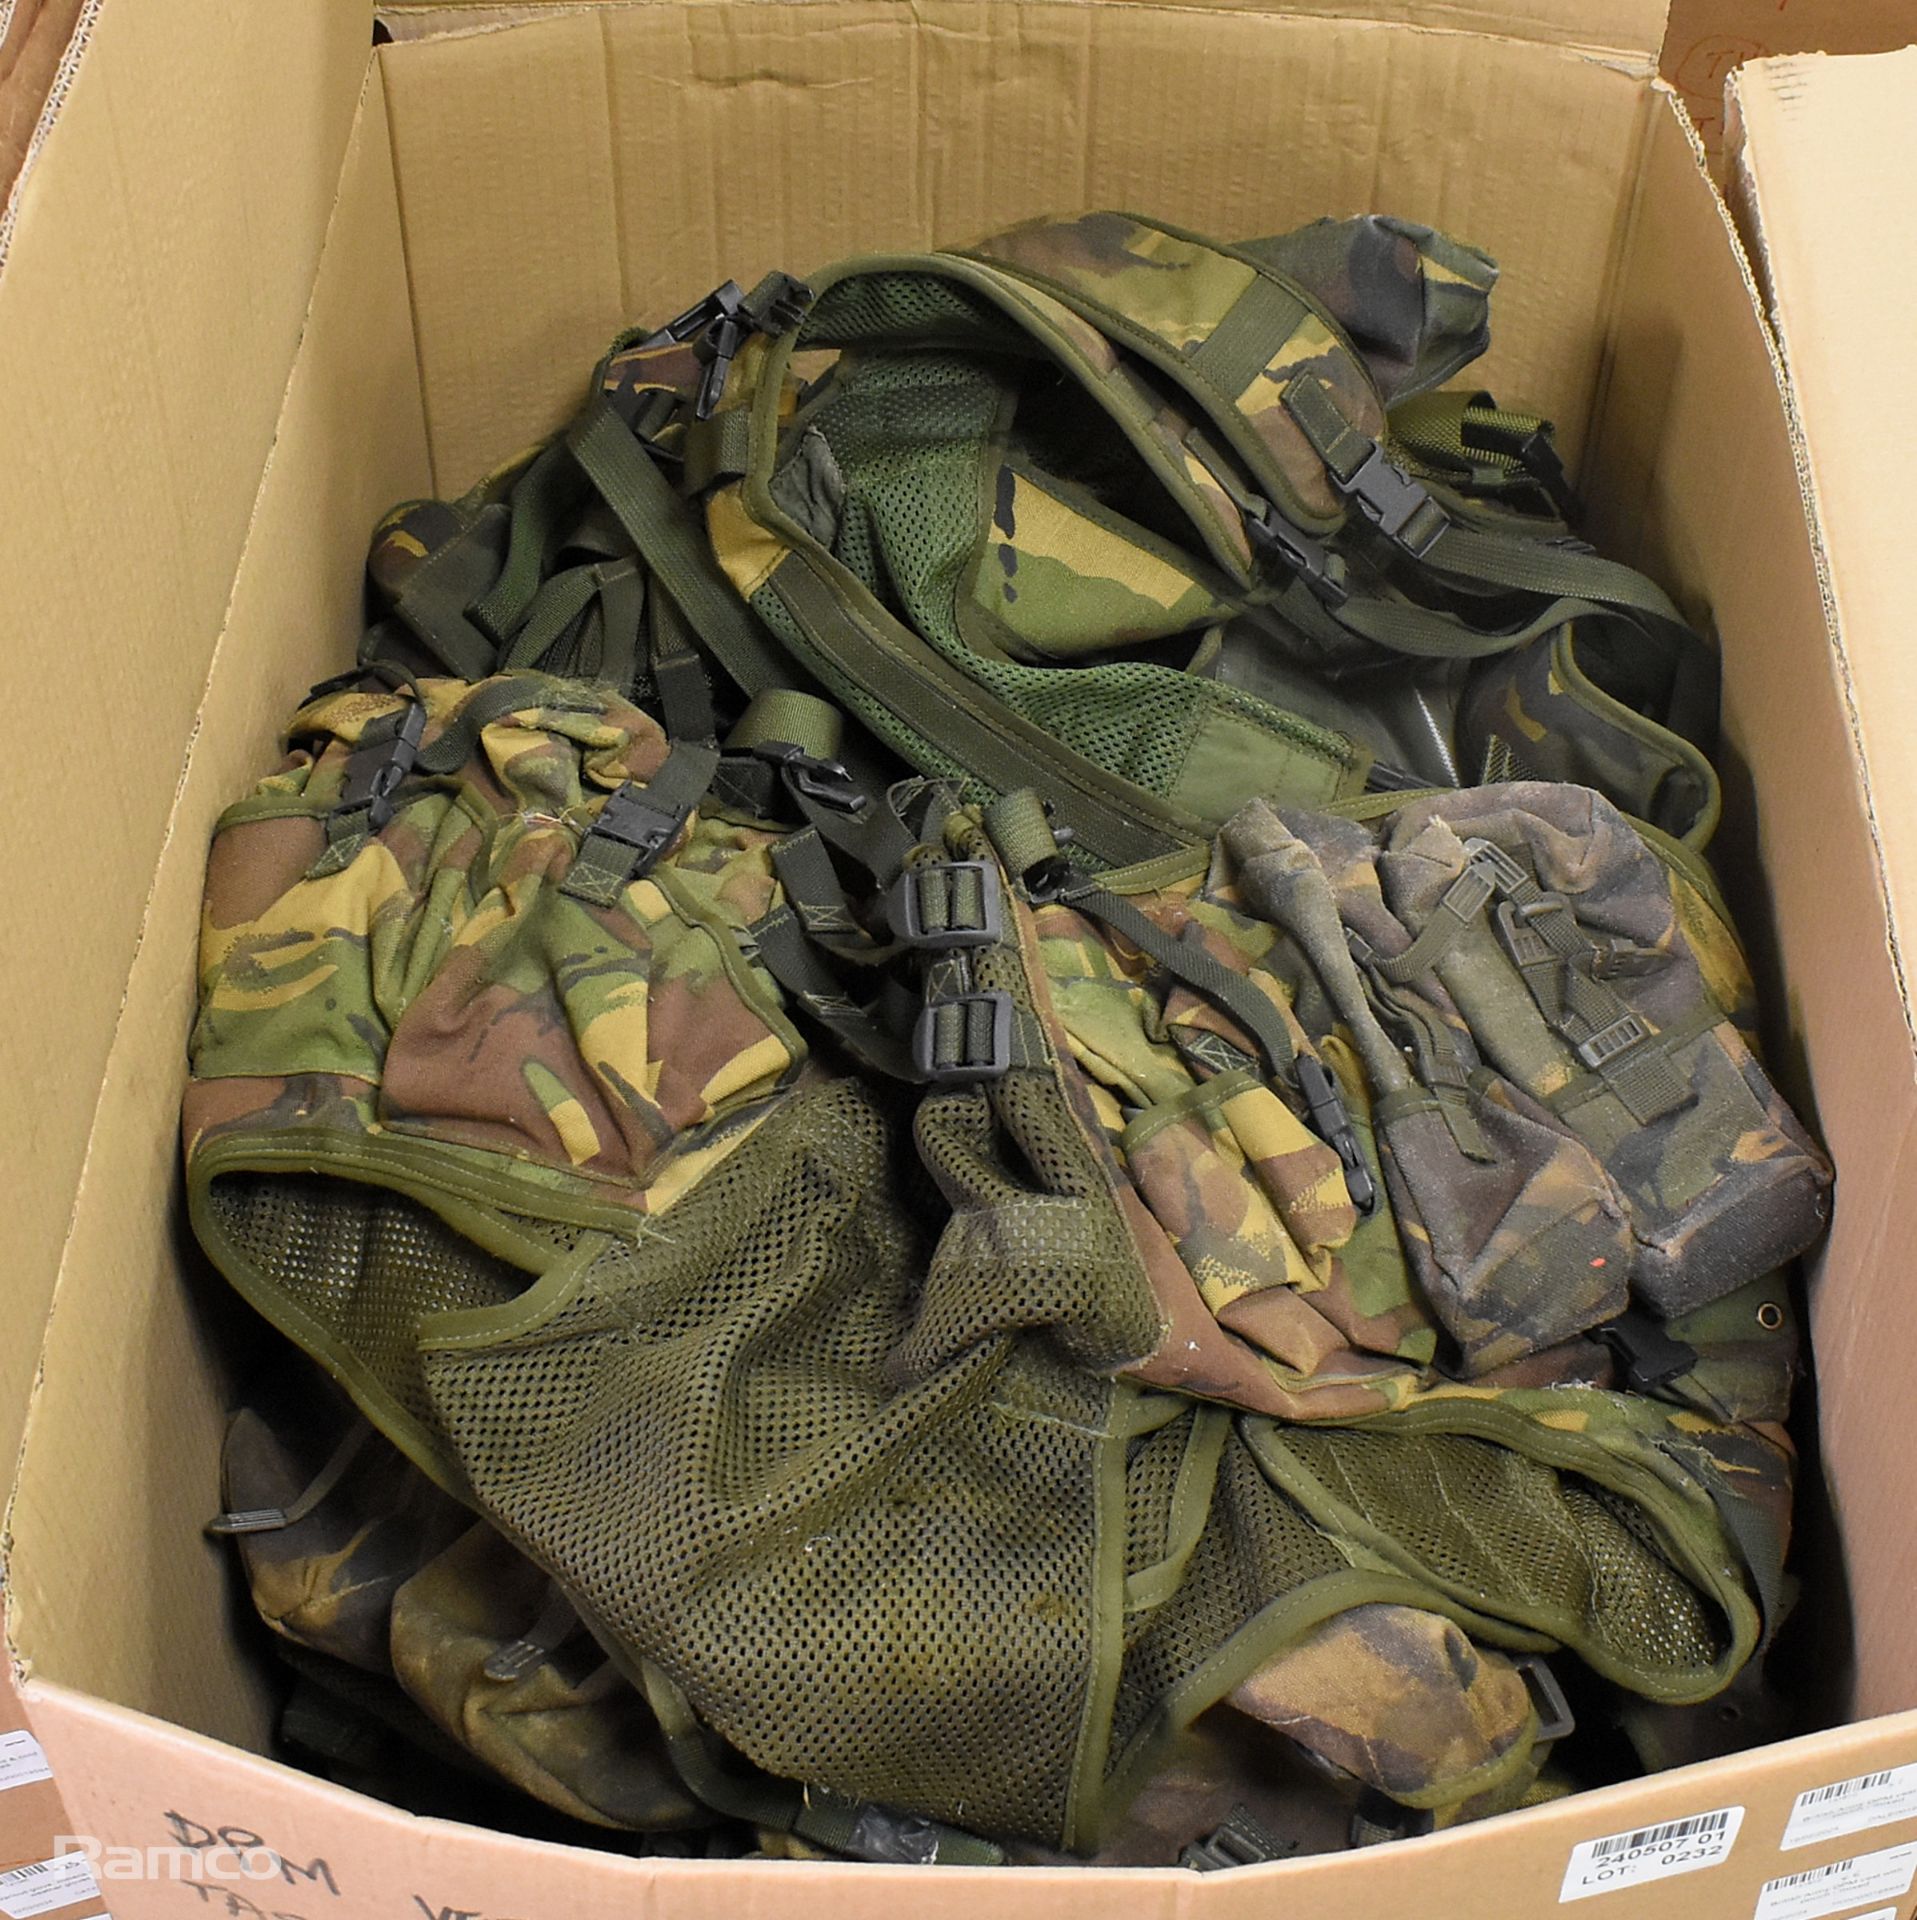 29x British Army DPM vests with pouches - mixed grades and sizes - Image 9 of 9